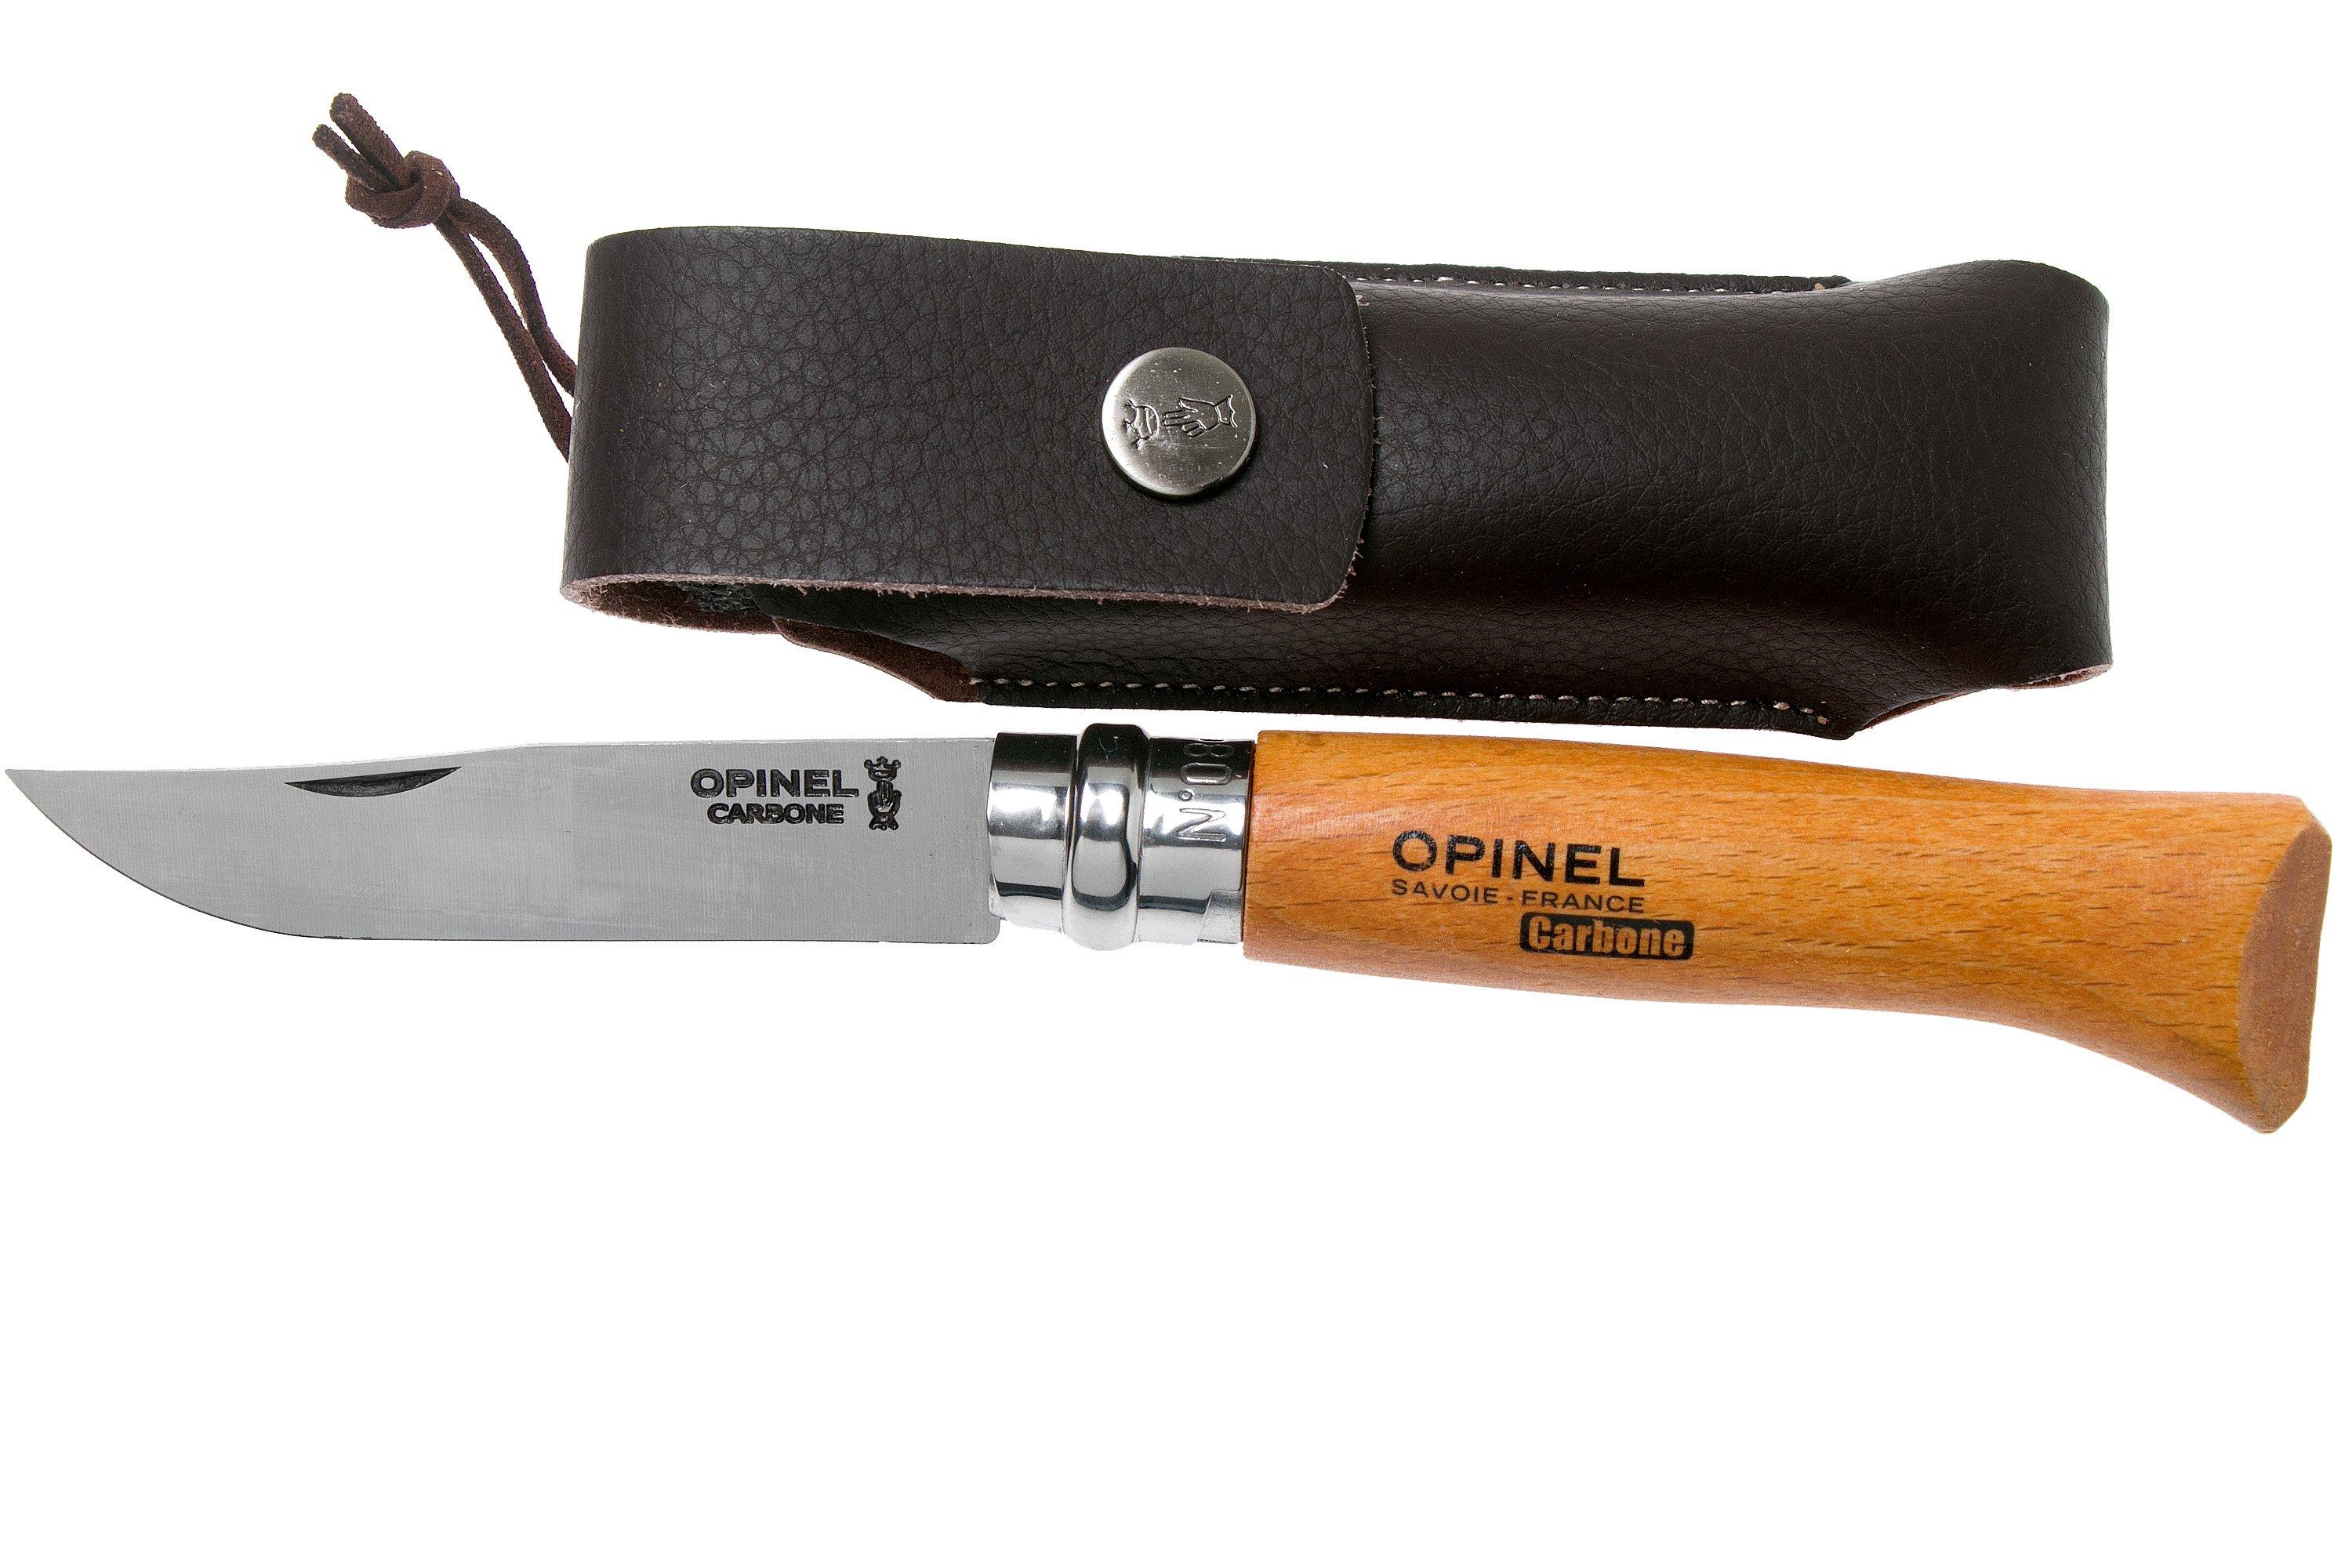 Opinel pocket knife No. 8 Luxury Range with leather sheath, carbon steel